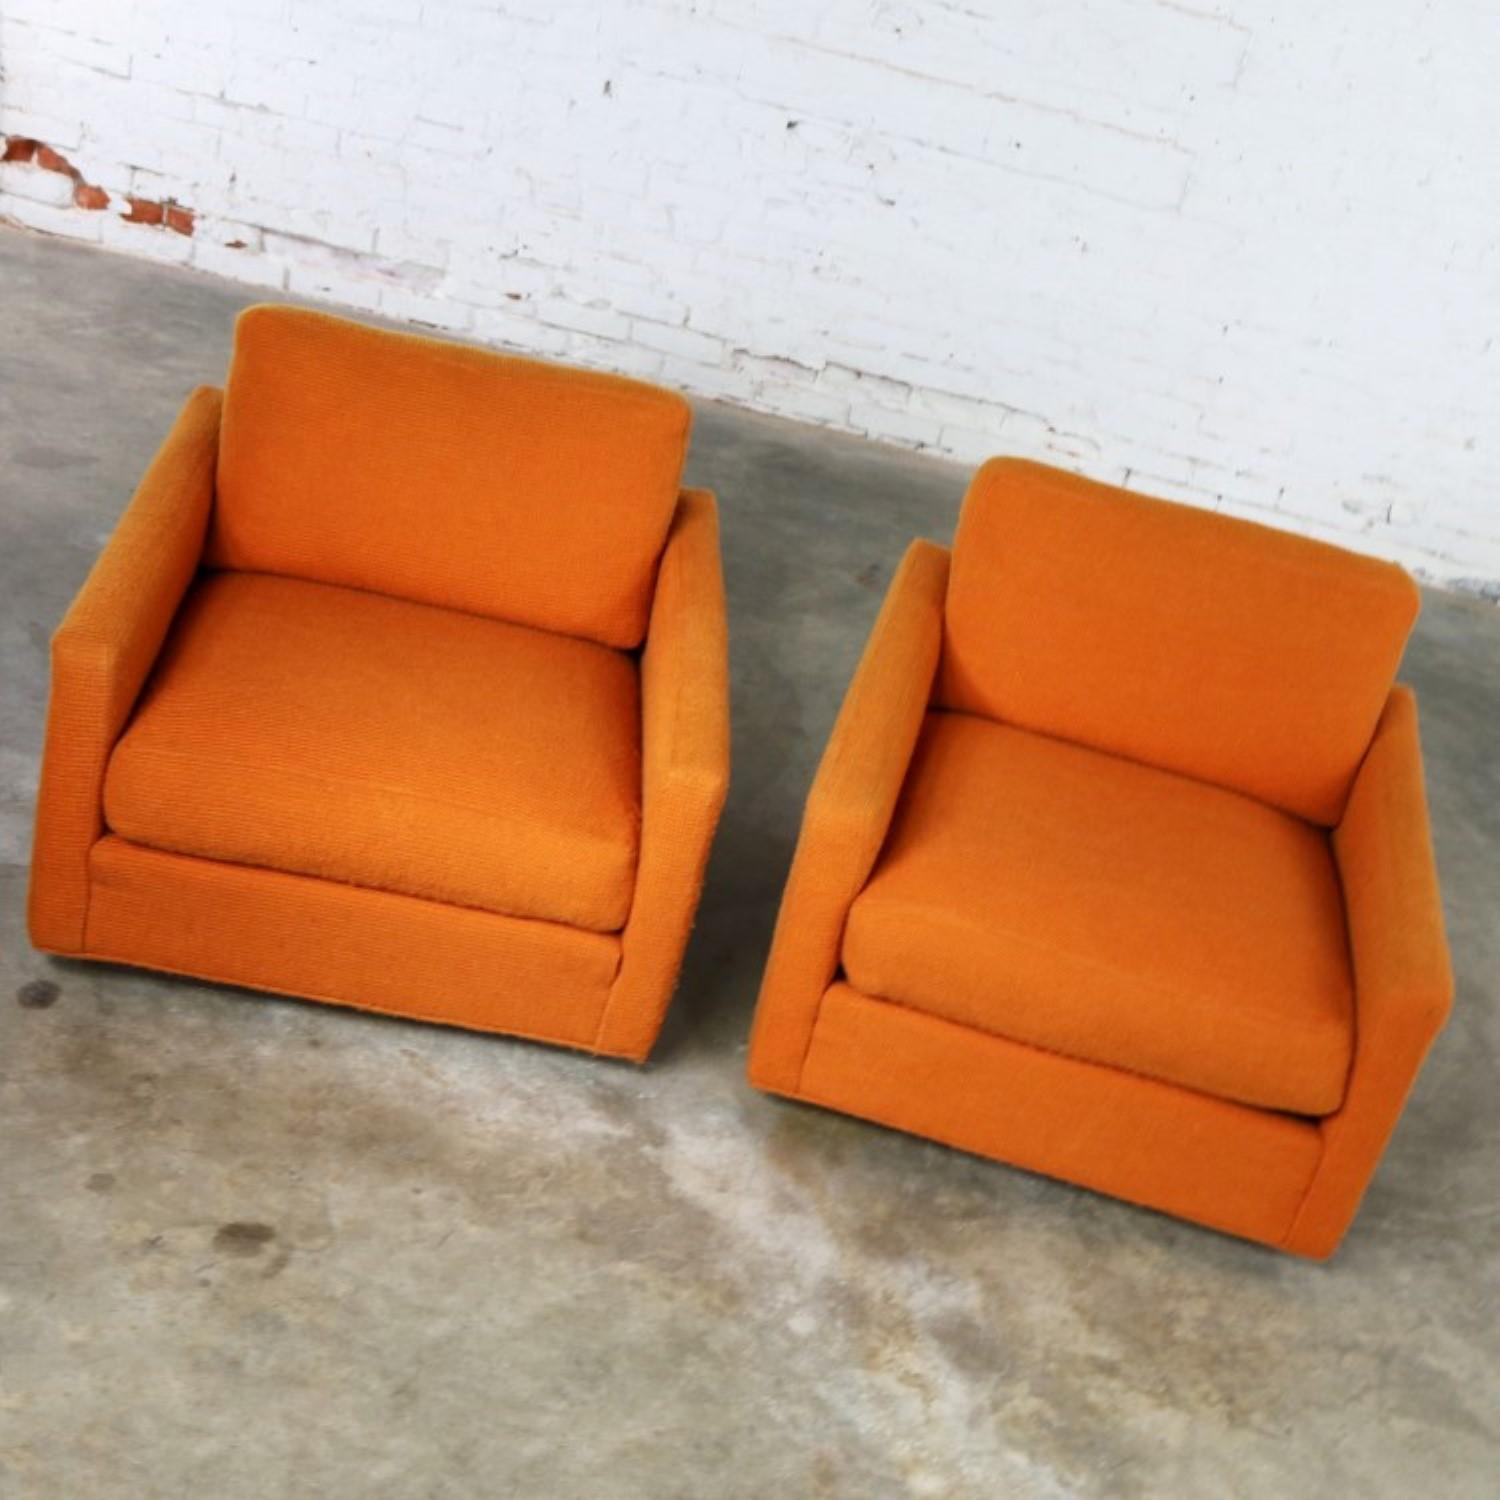 American Thayer Coggin Cube Lounge Chairs Orange Lawson Style Attributed to Milo Baughman